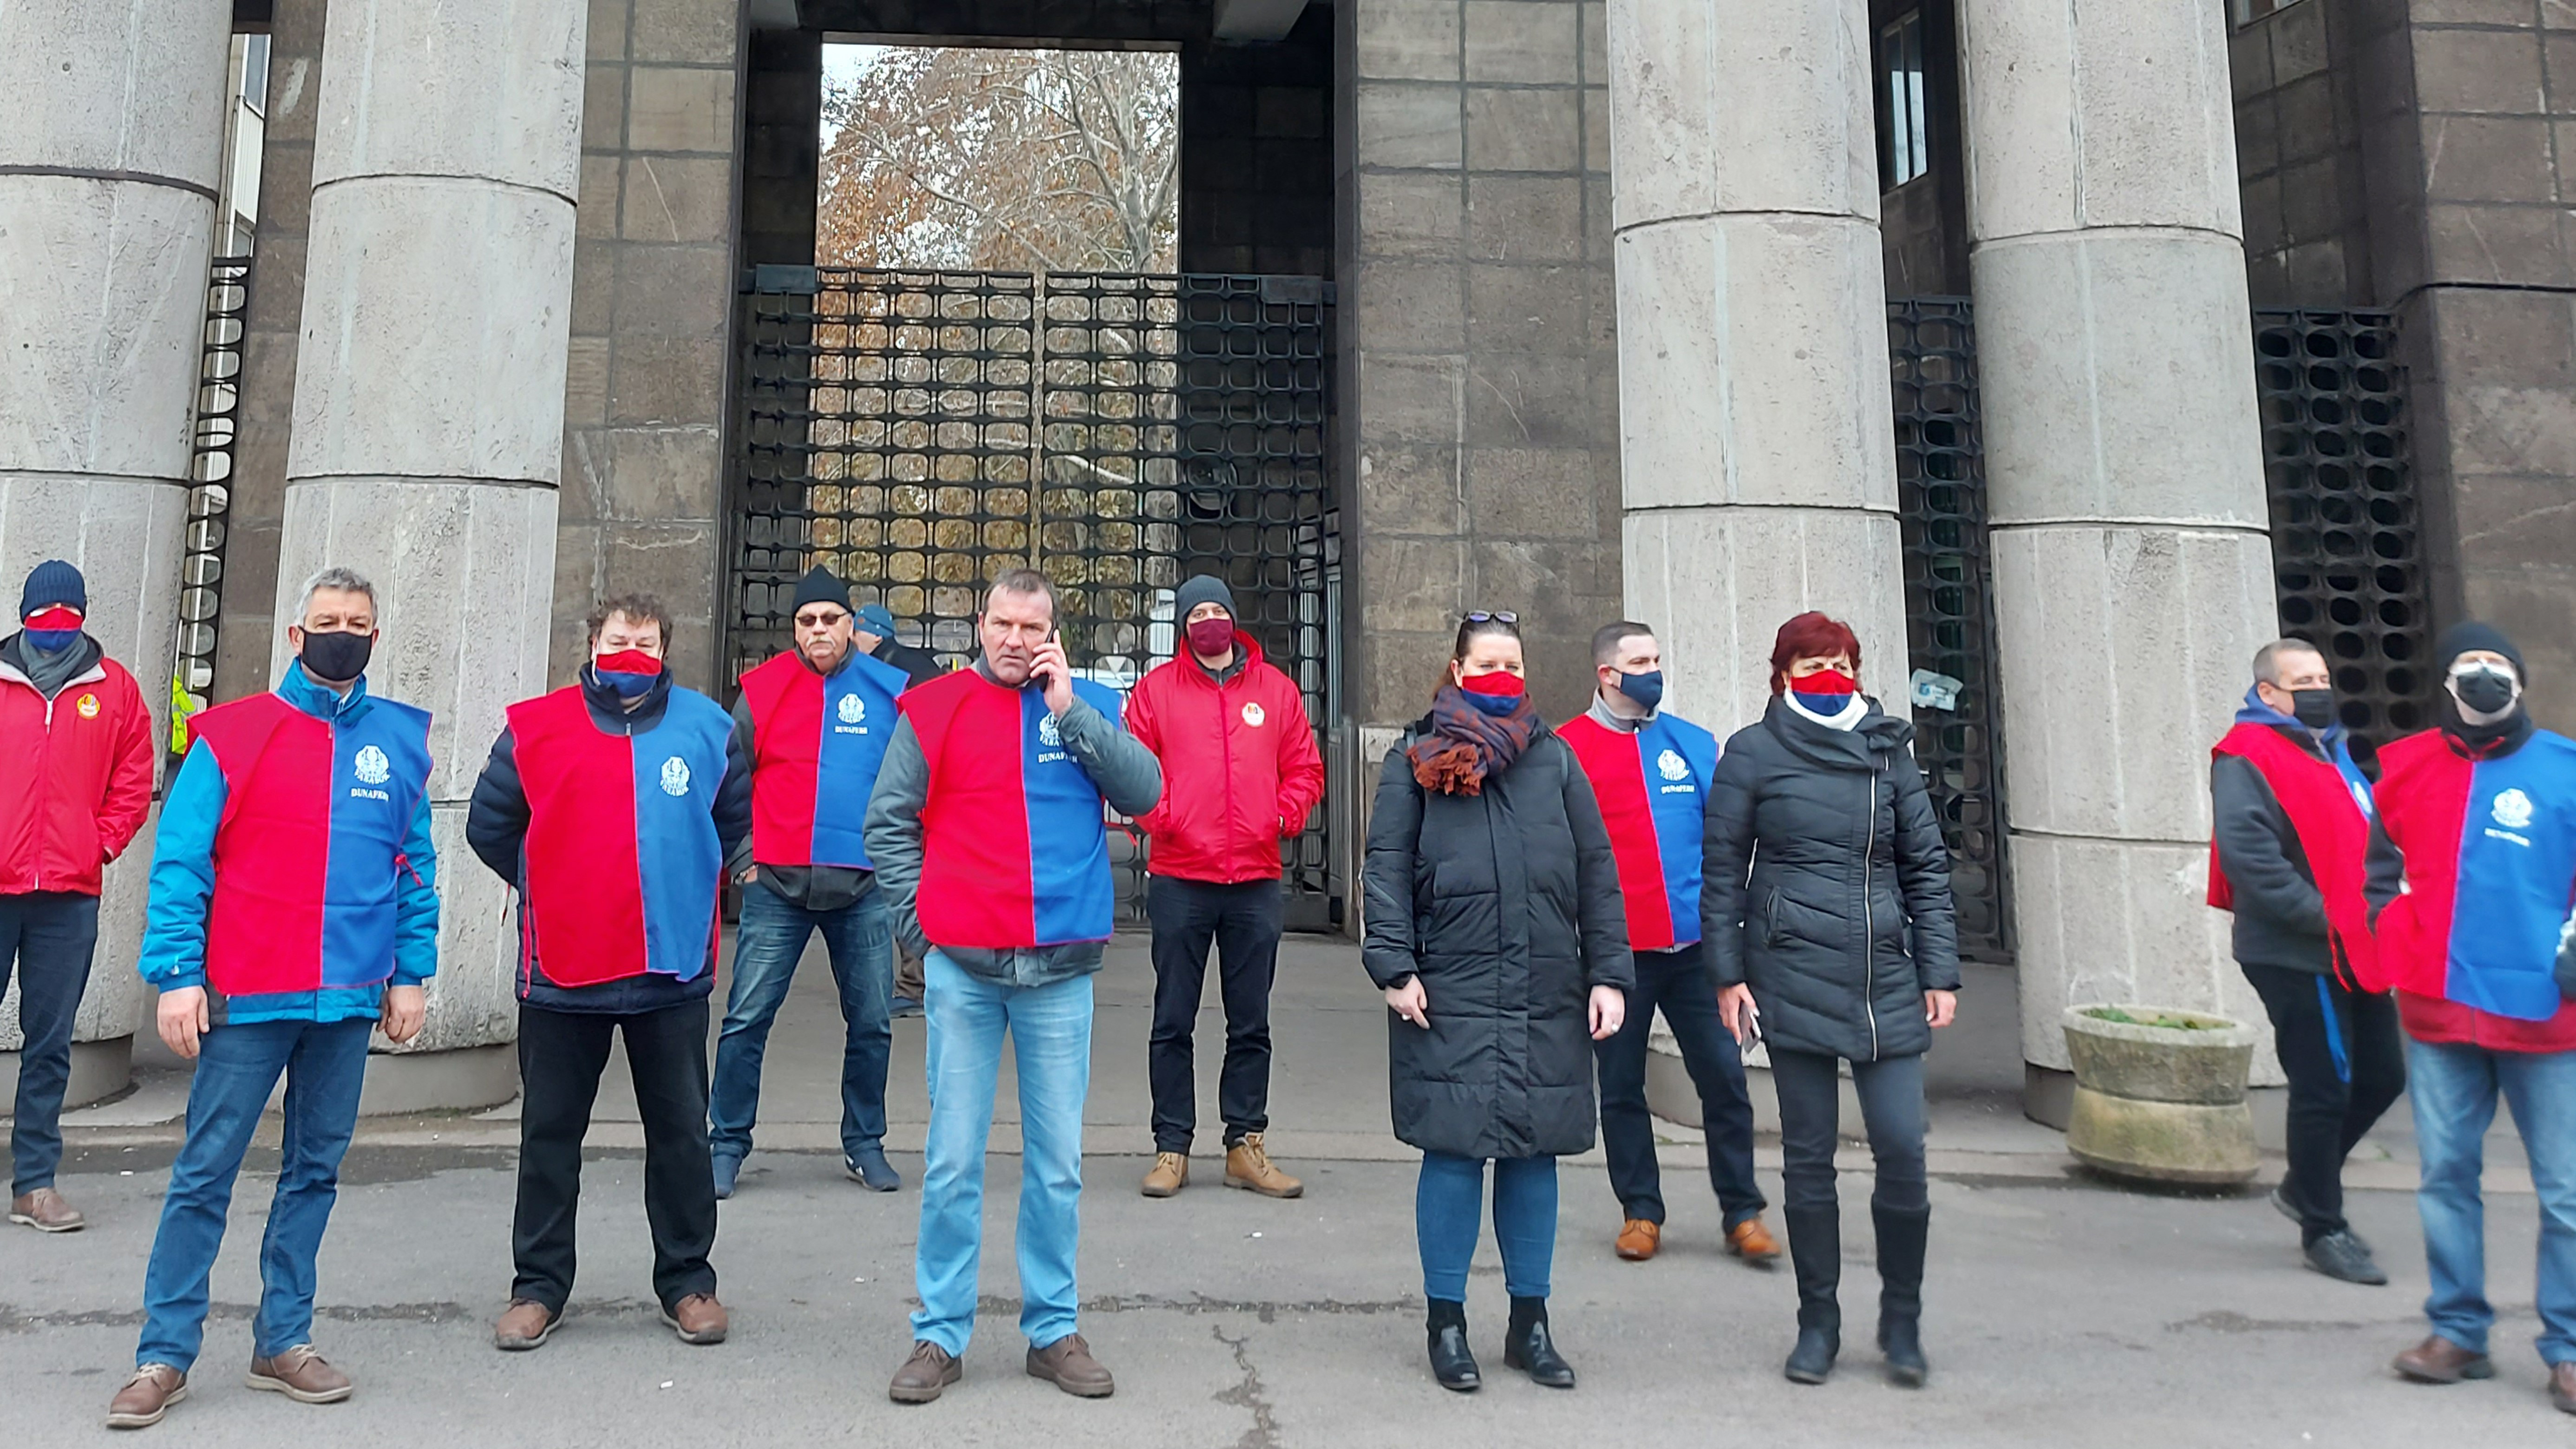 VASAS members and the 4 dismissed trade union leaders, barred entry to the company